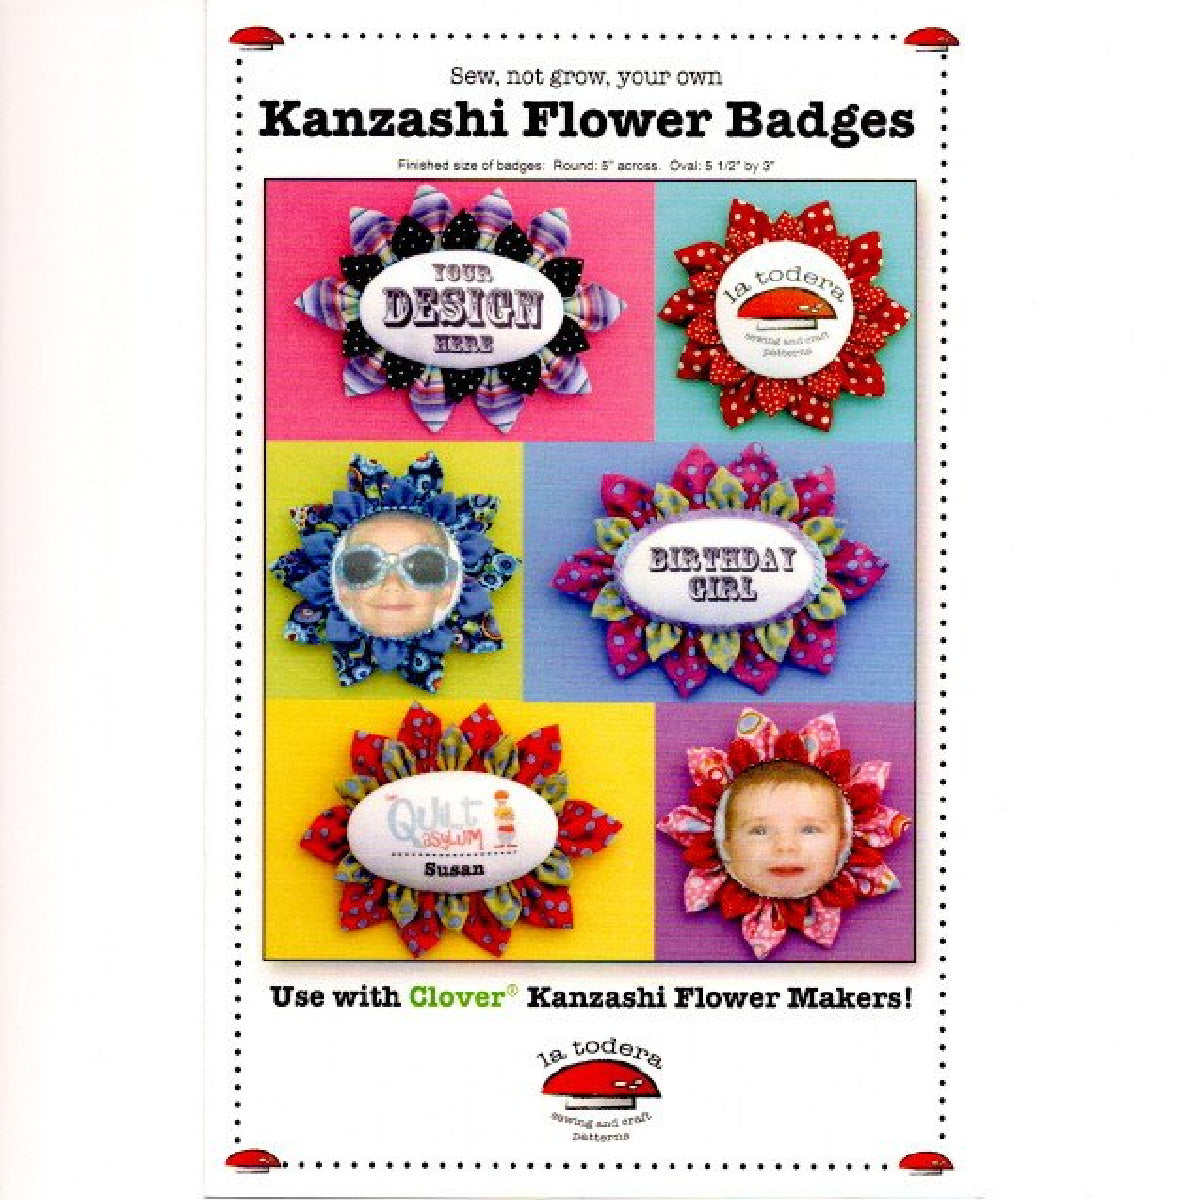 Kanzashi Flower Badges Sewing Pattern - Nonna's Notions N' Sew On